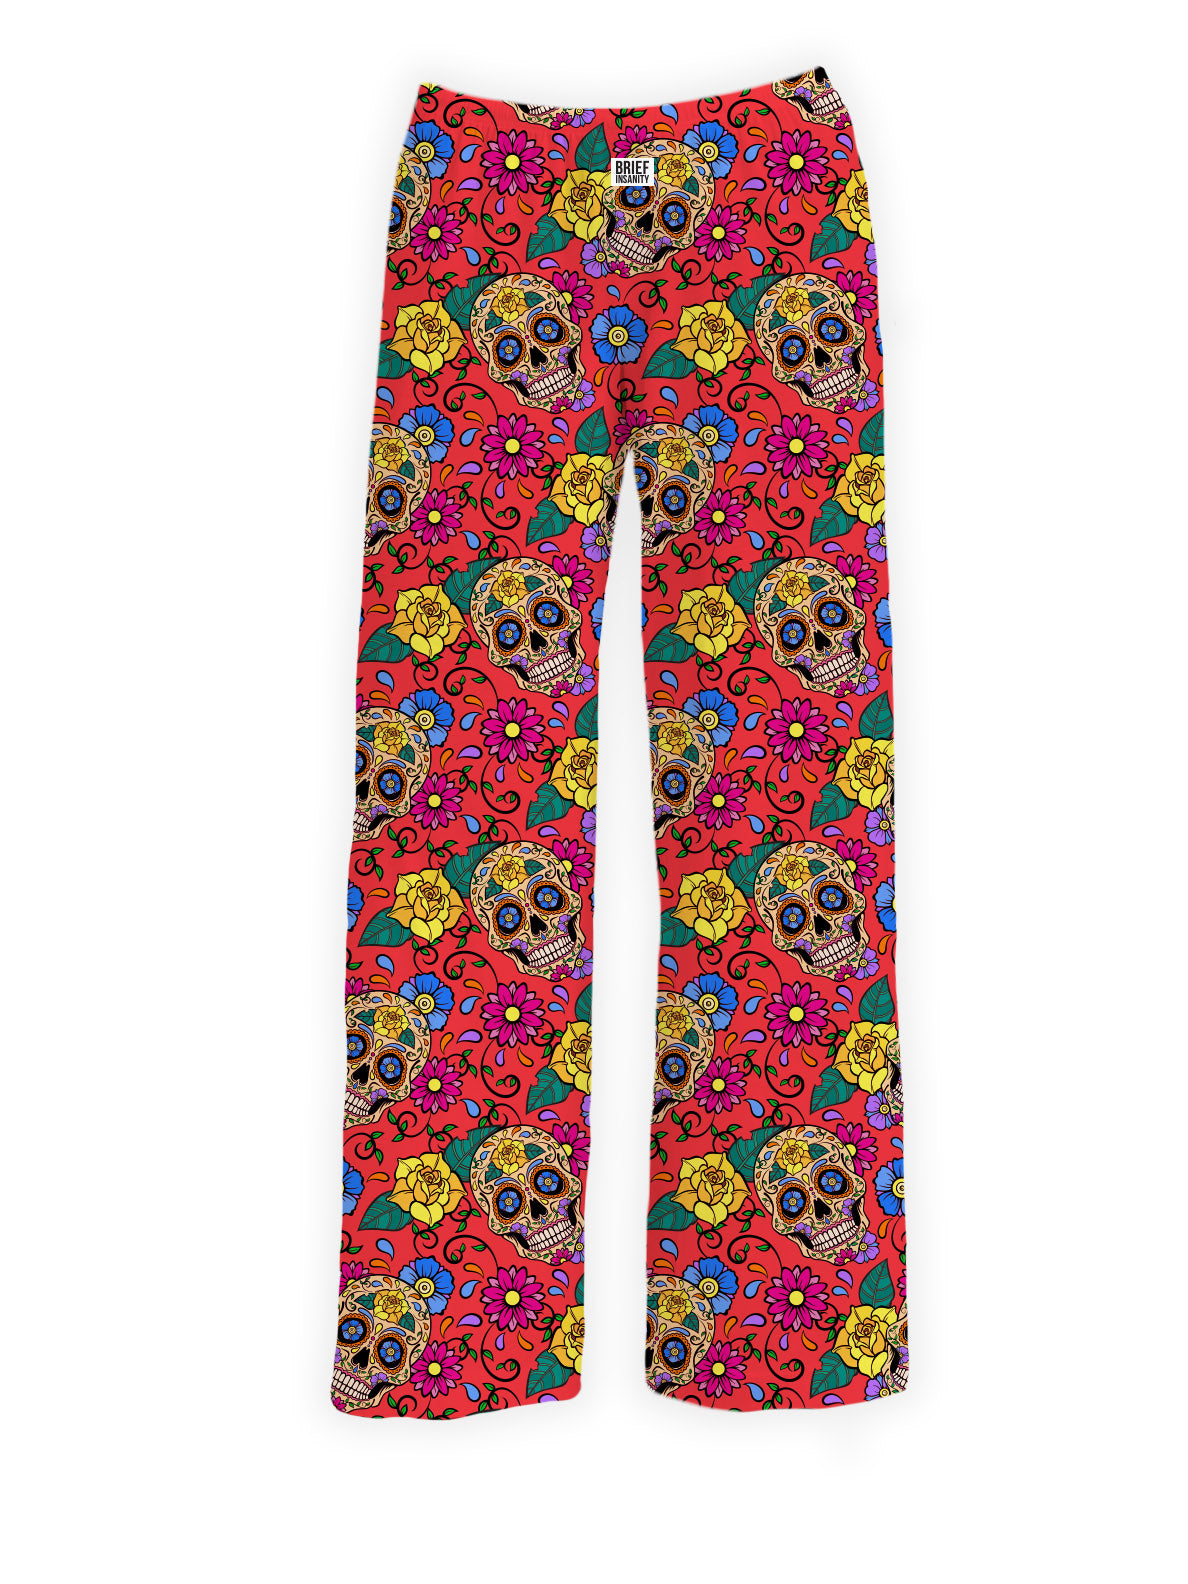 BRIEF INSANITY Day of the Dead Pajama Lounge Pants